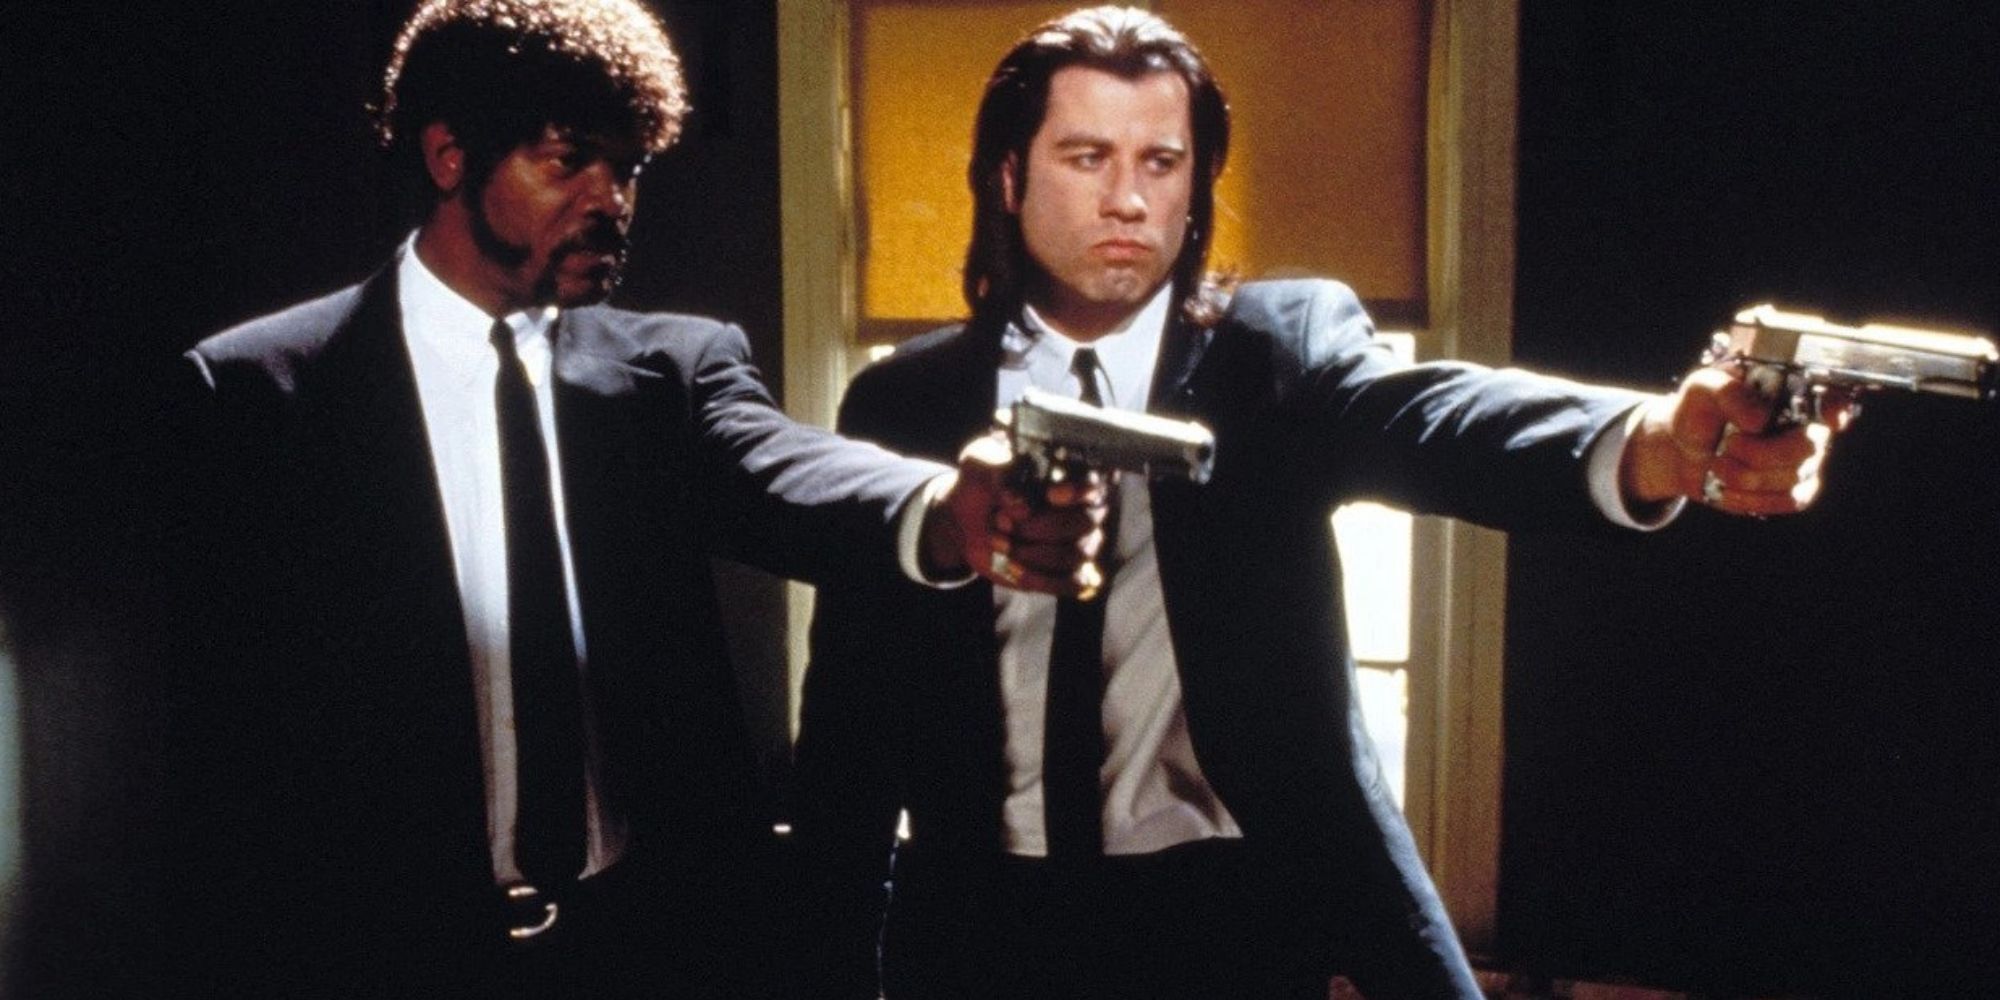 Samuel L. Jackson and John Travolta in suits holding guns in a scene from Pulp Fiction.